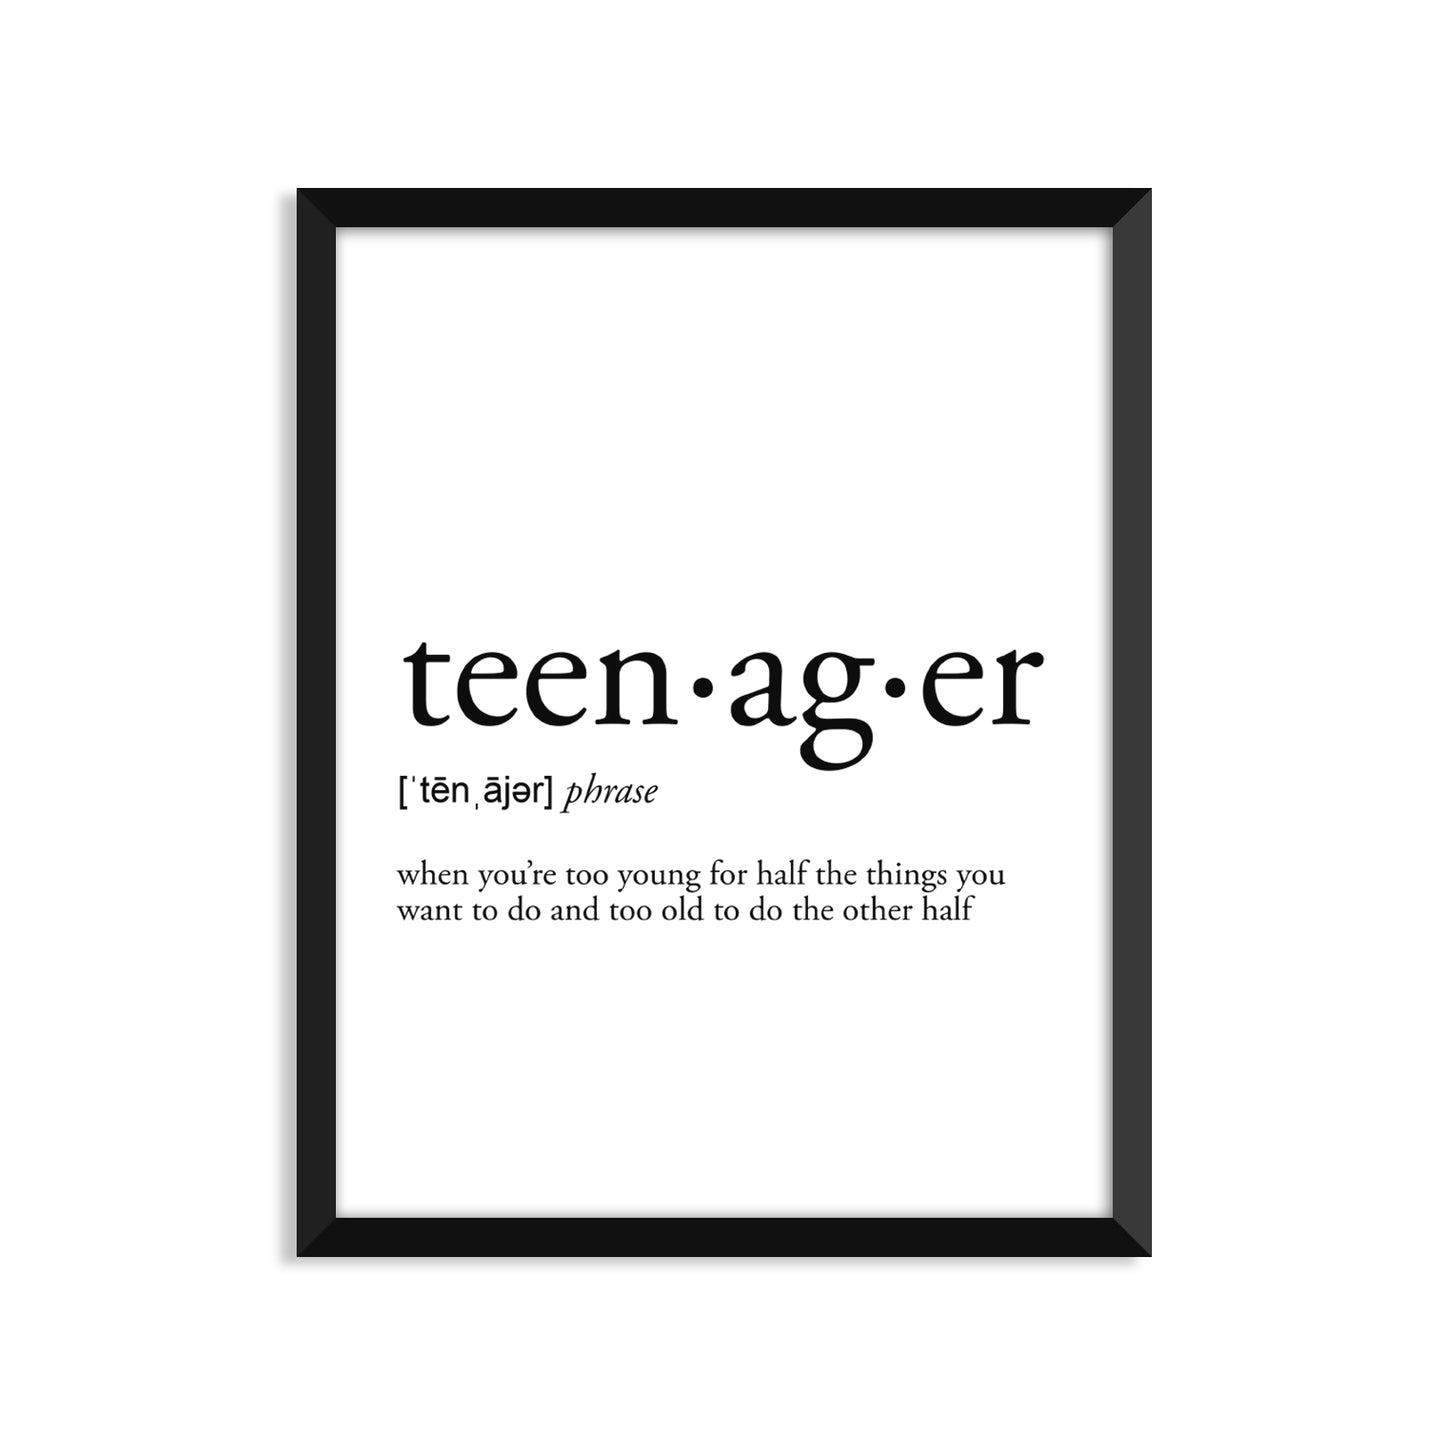 Teenager Definition - Unframed Art Print Or Greeting Card